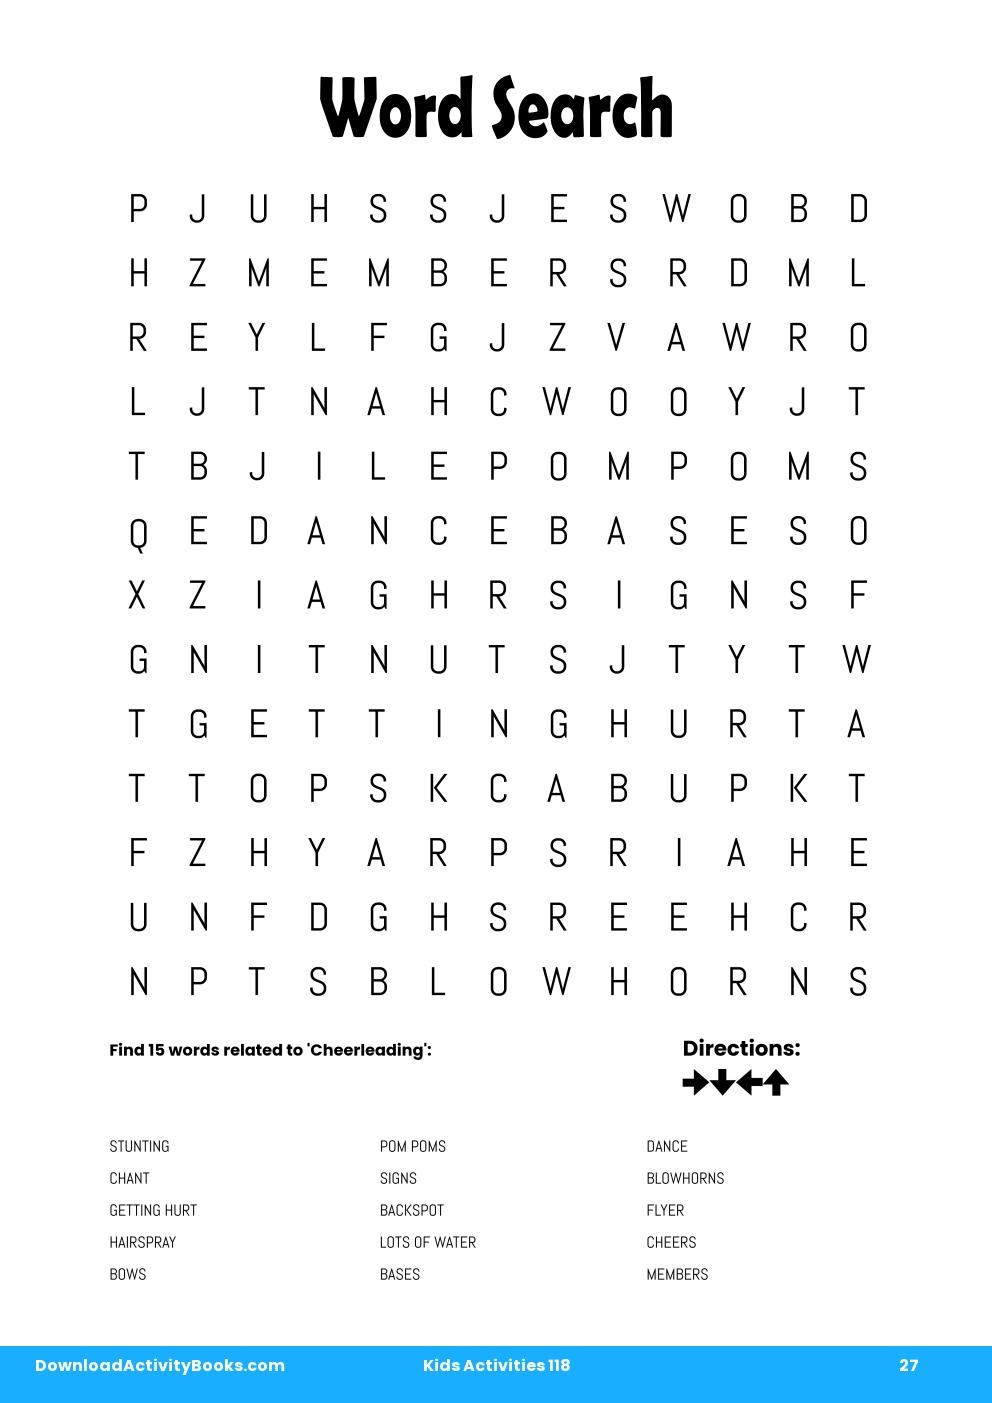 Word Search in Kids Activities 118